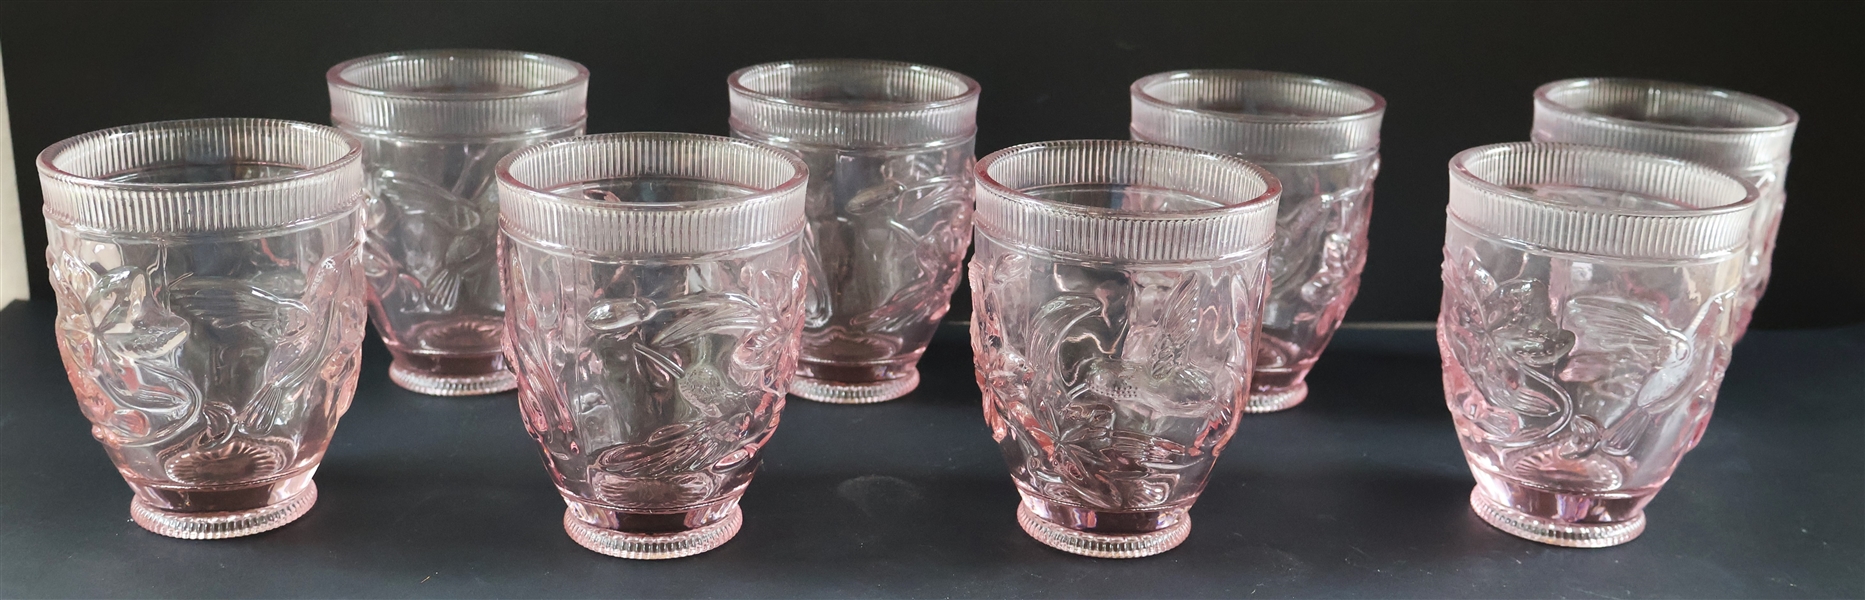 8 Pink Humming Bird and Flower Tumblers - Each Measures 4" Tall 